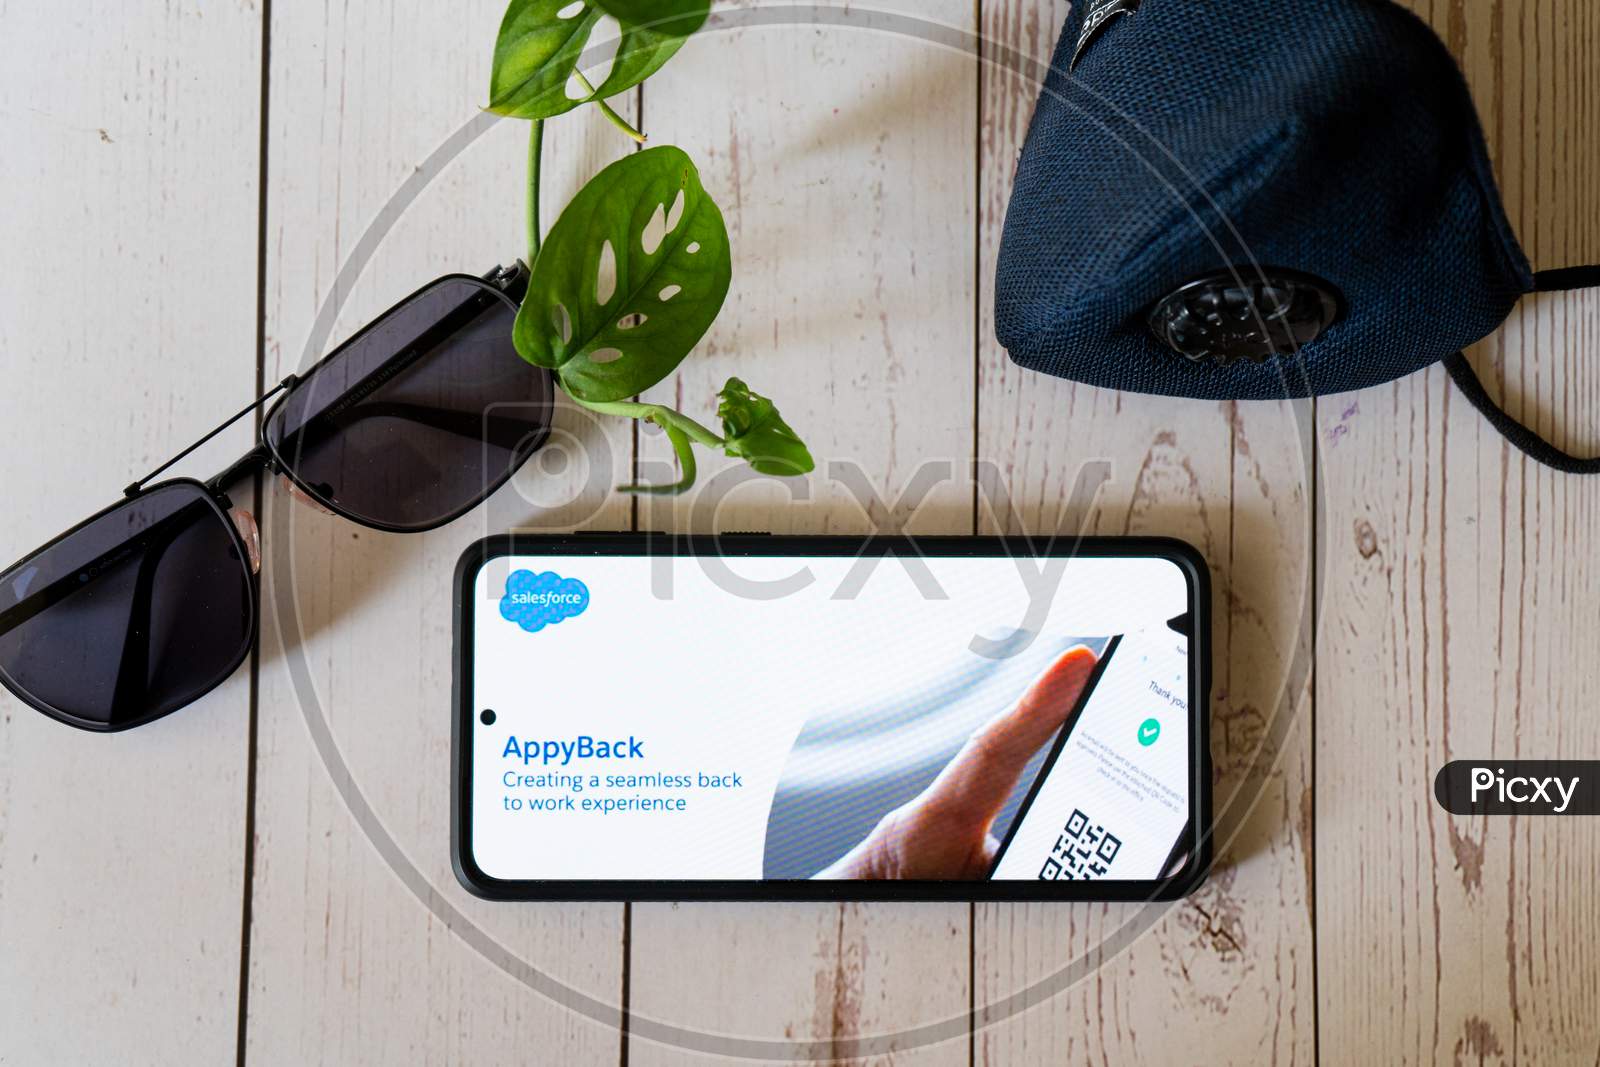 Salesforce Led Appyback App One Of The Leading App For Enterprise Management Helping People Return To Office Book Slots And More Post The Covid 19 Coronavirus Pandemic As Offices Open Up